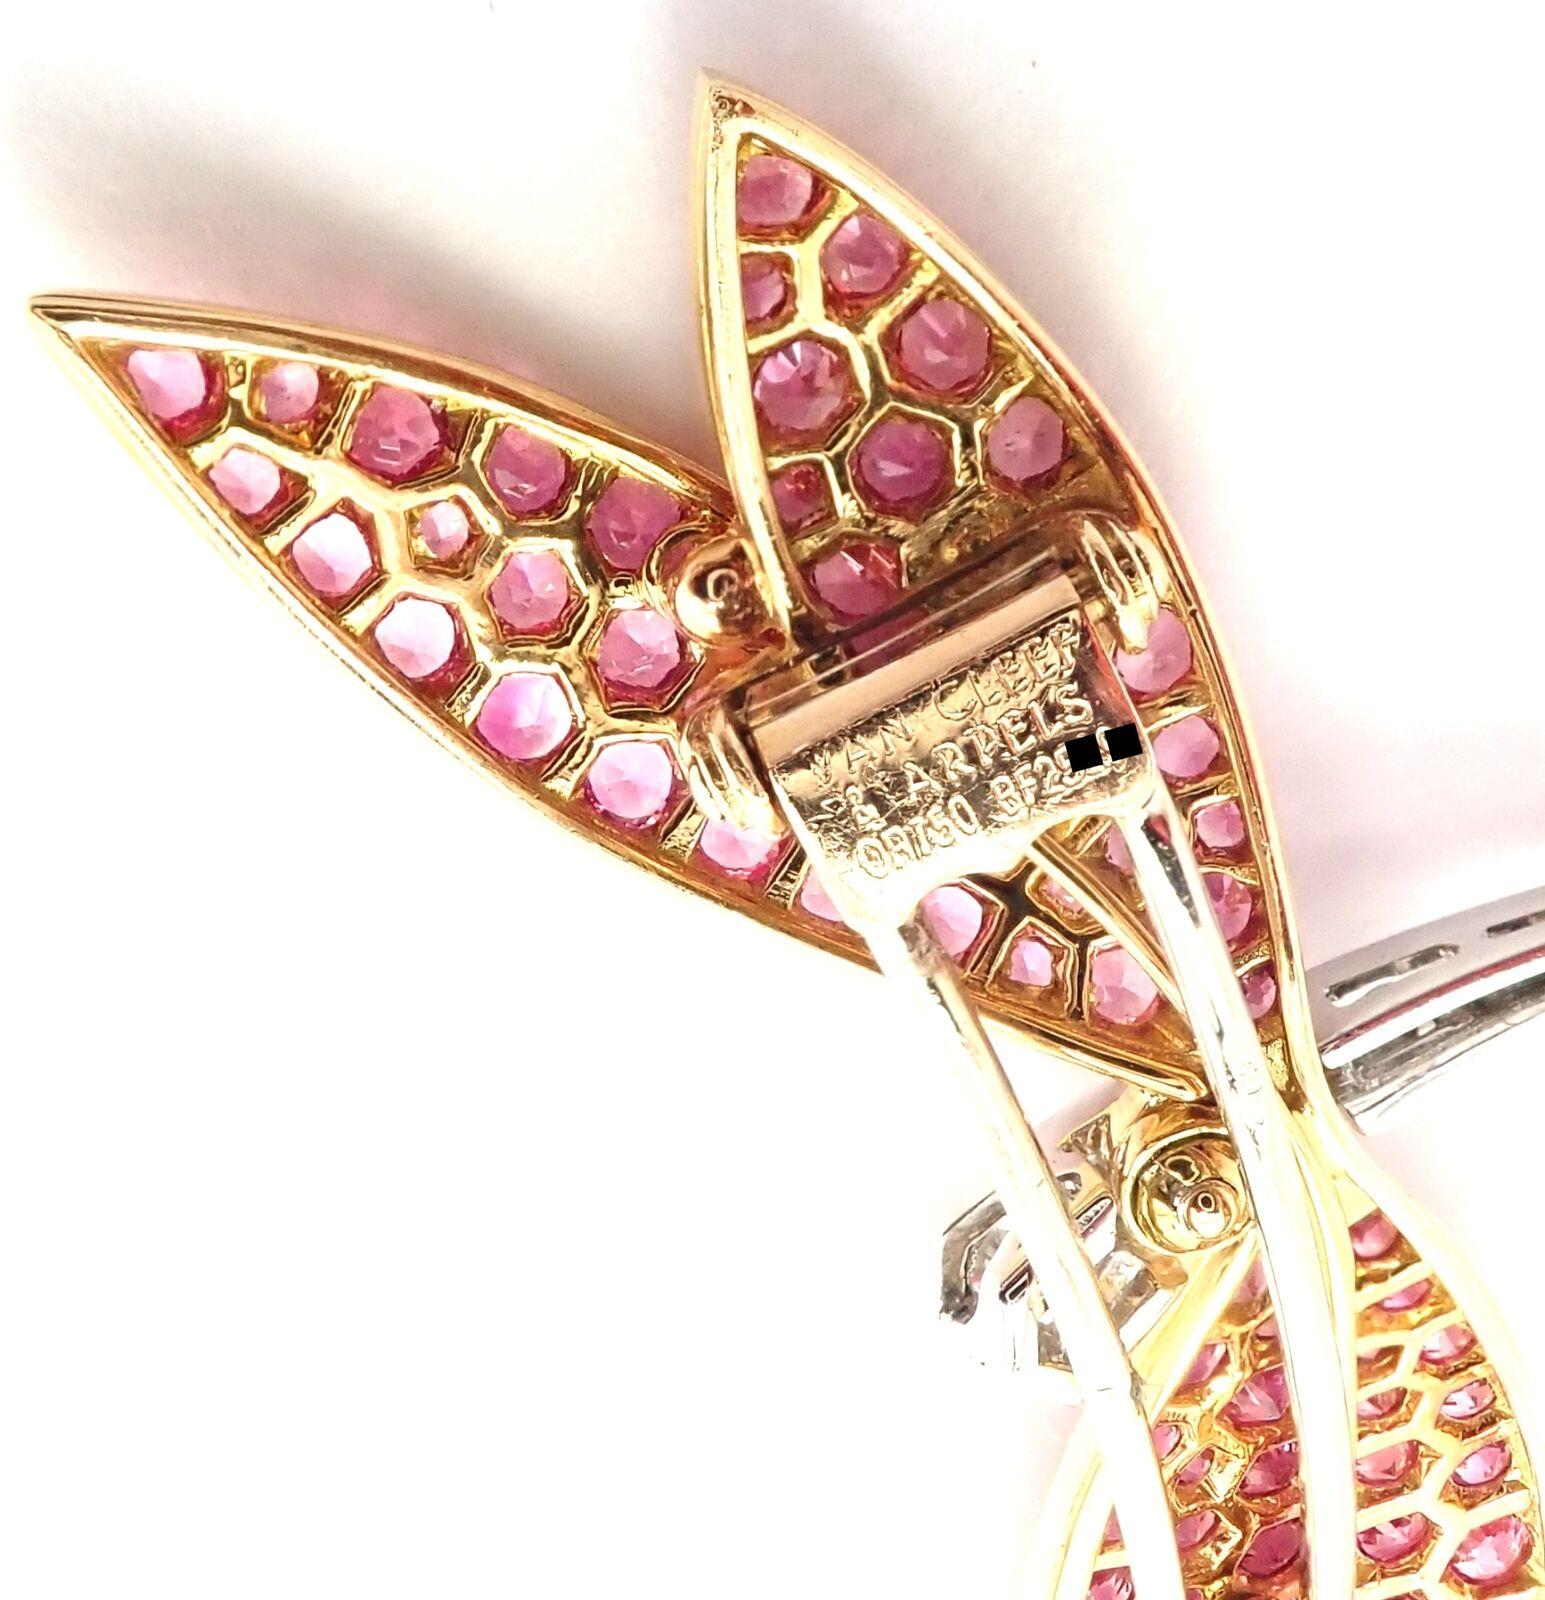 Van Cleef & Arpels Dragonfly Diamond Pink Sapphire White Gold Pin Brooch 3